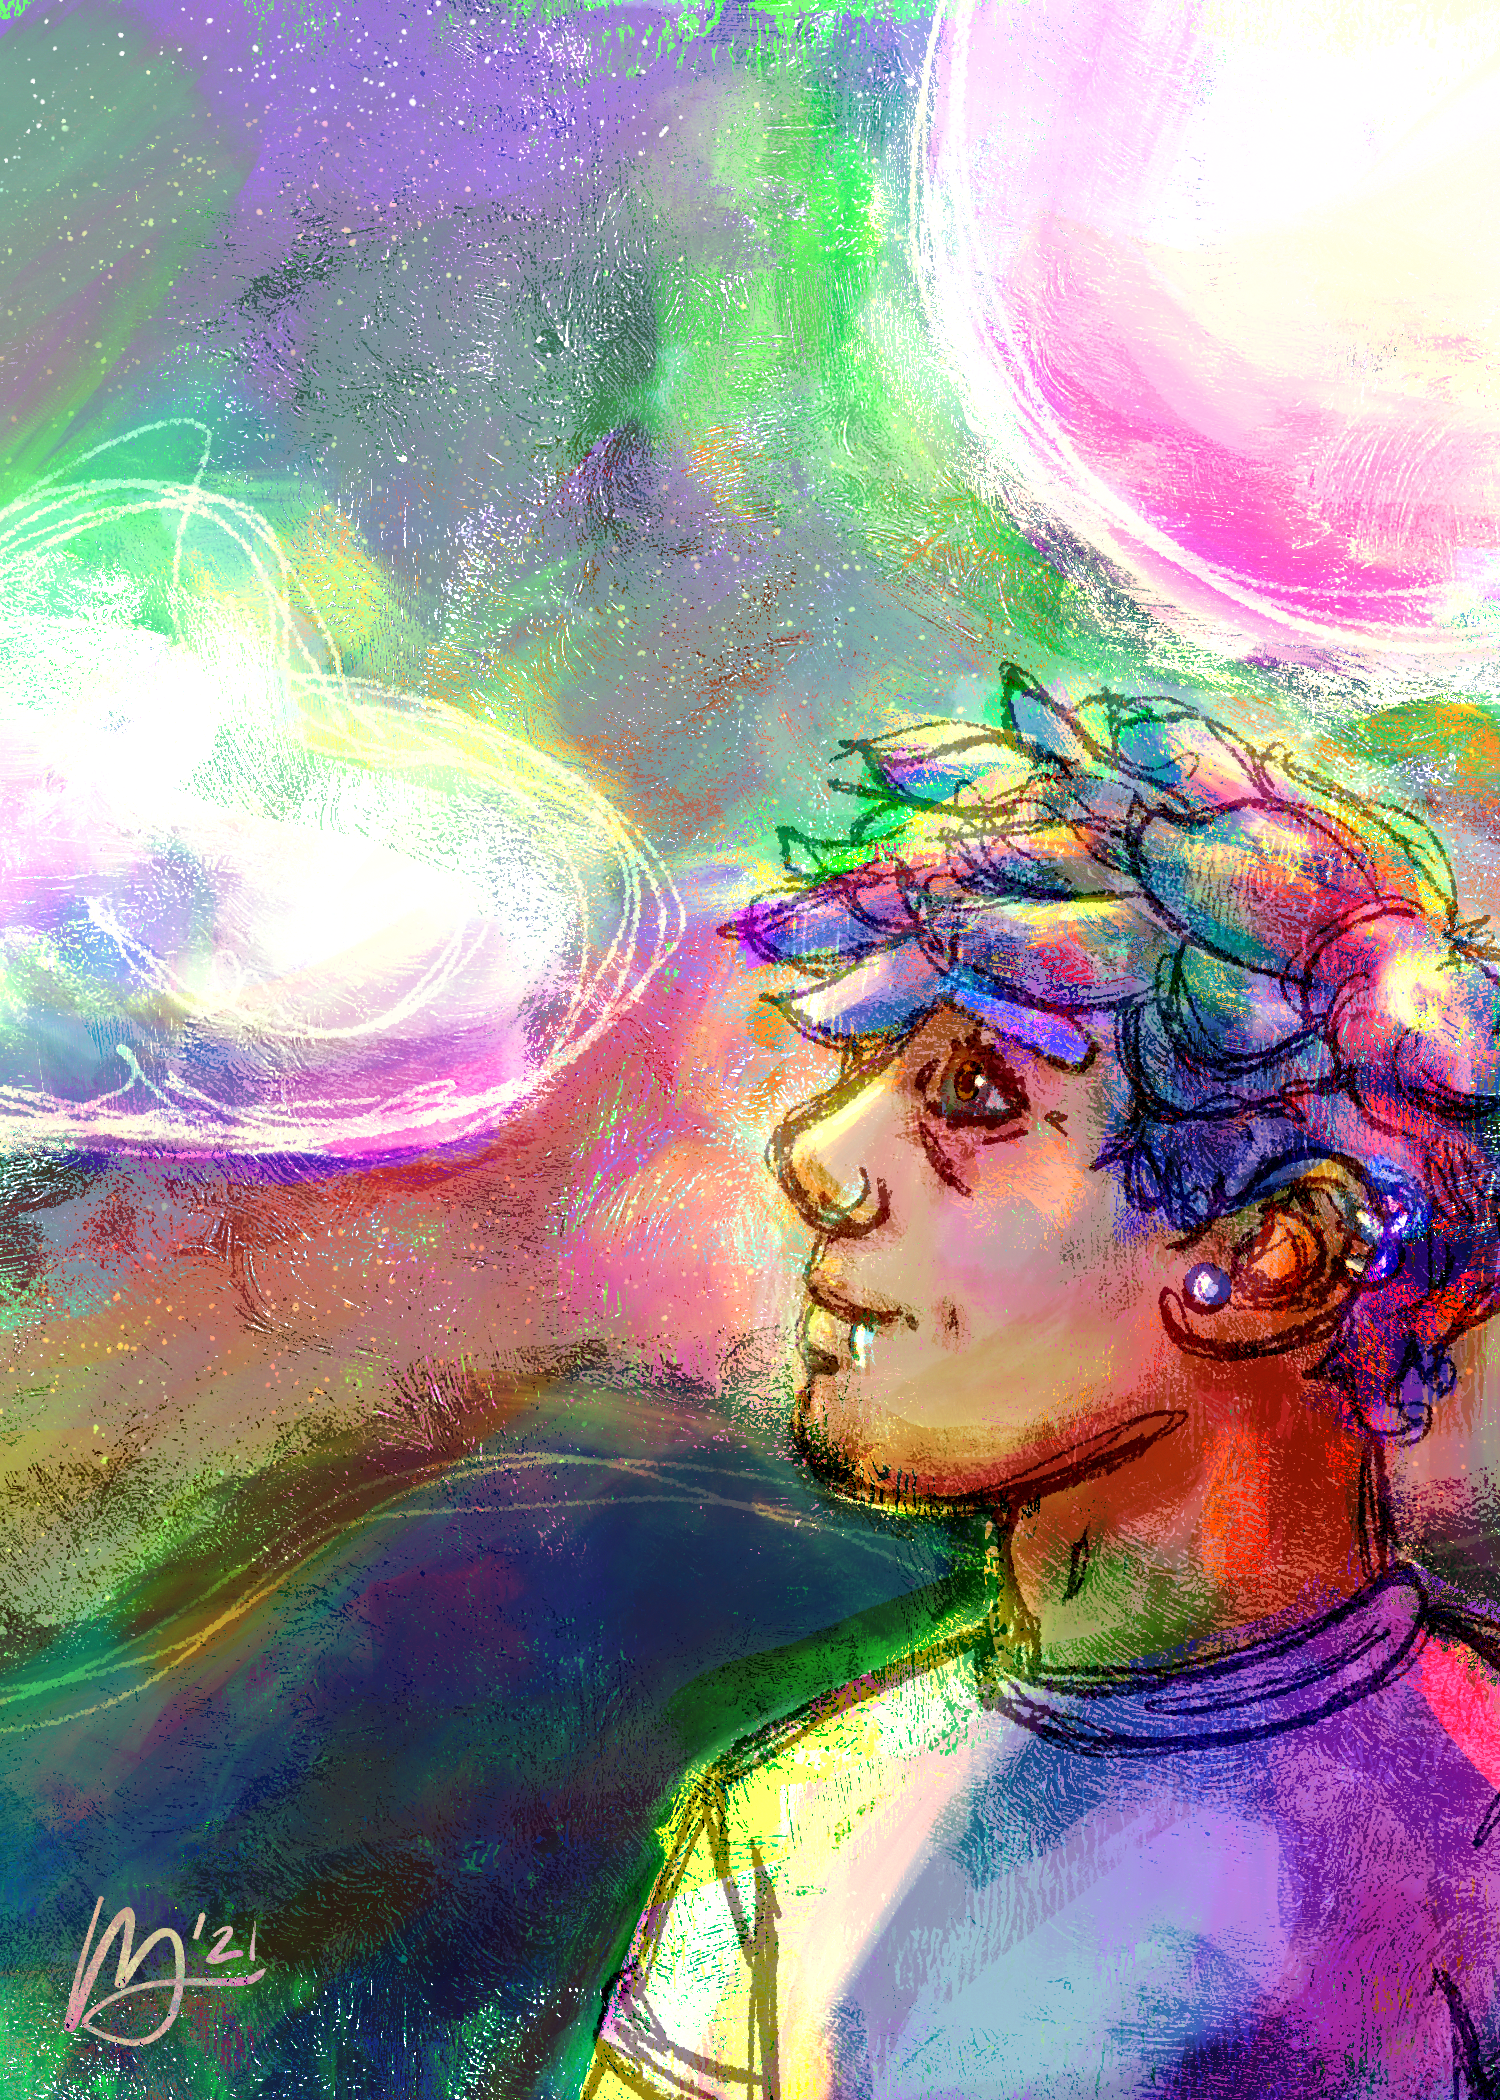 Surreal illustration of a curly-haired person with piercings gazing into a vibrantly colored sky